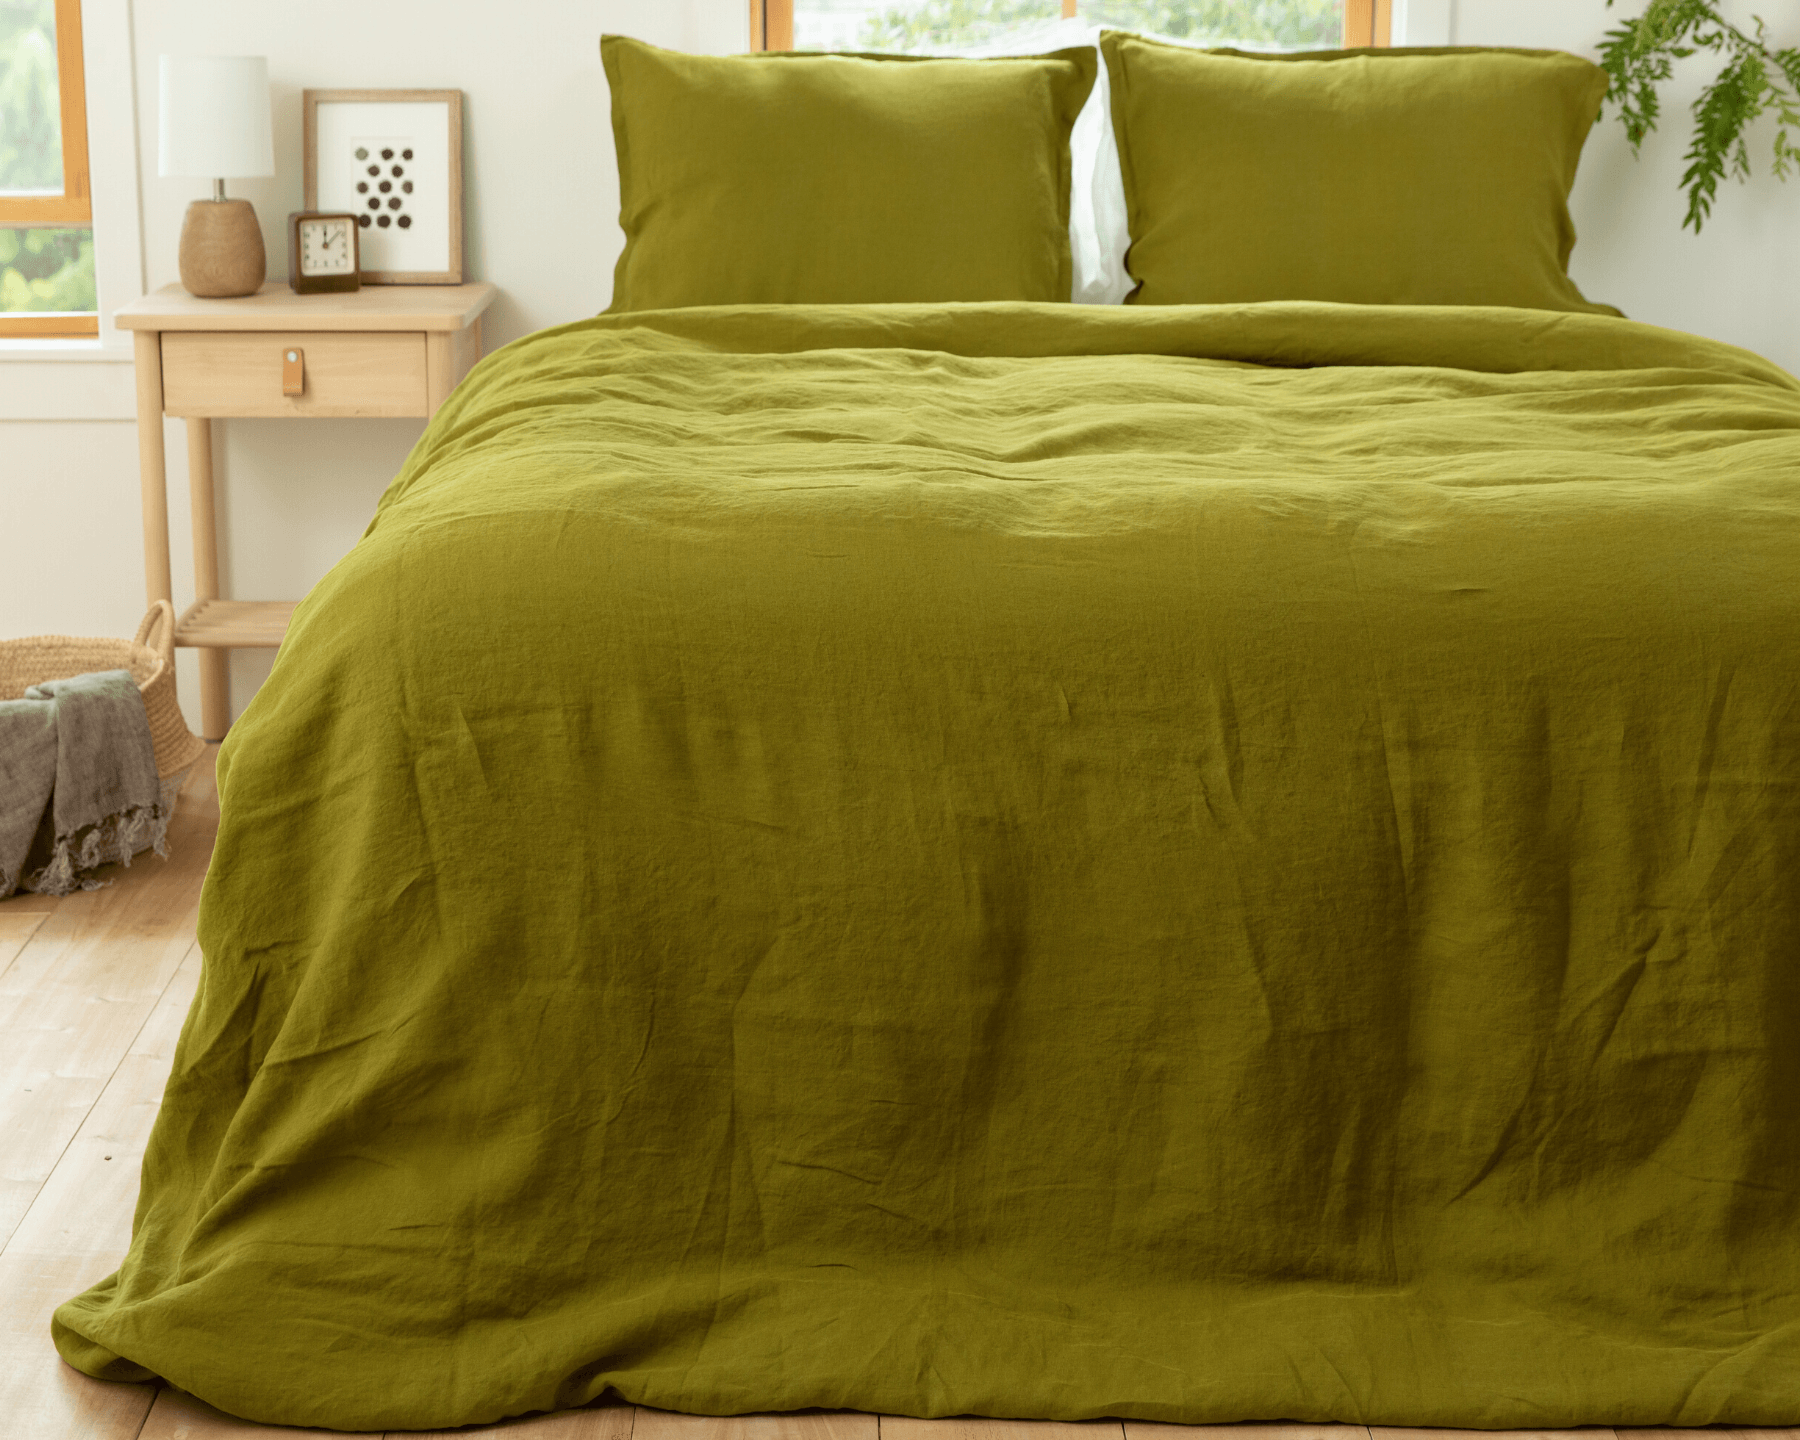 Olive green organic European linen duvet cover set with two matching pillowcases